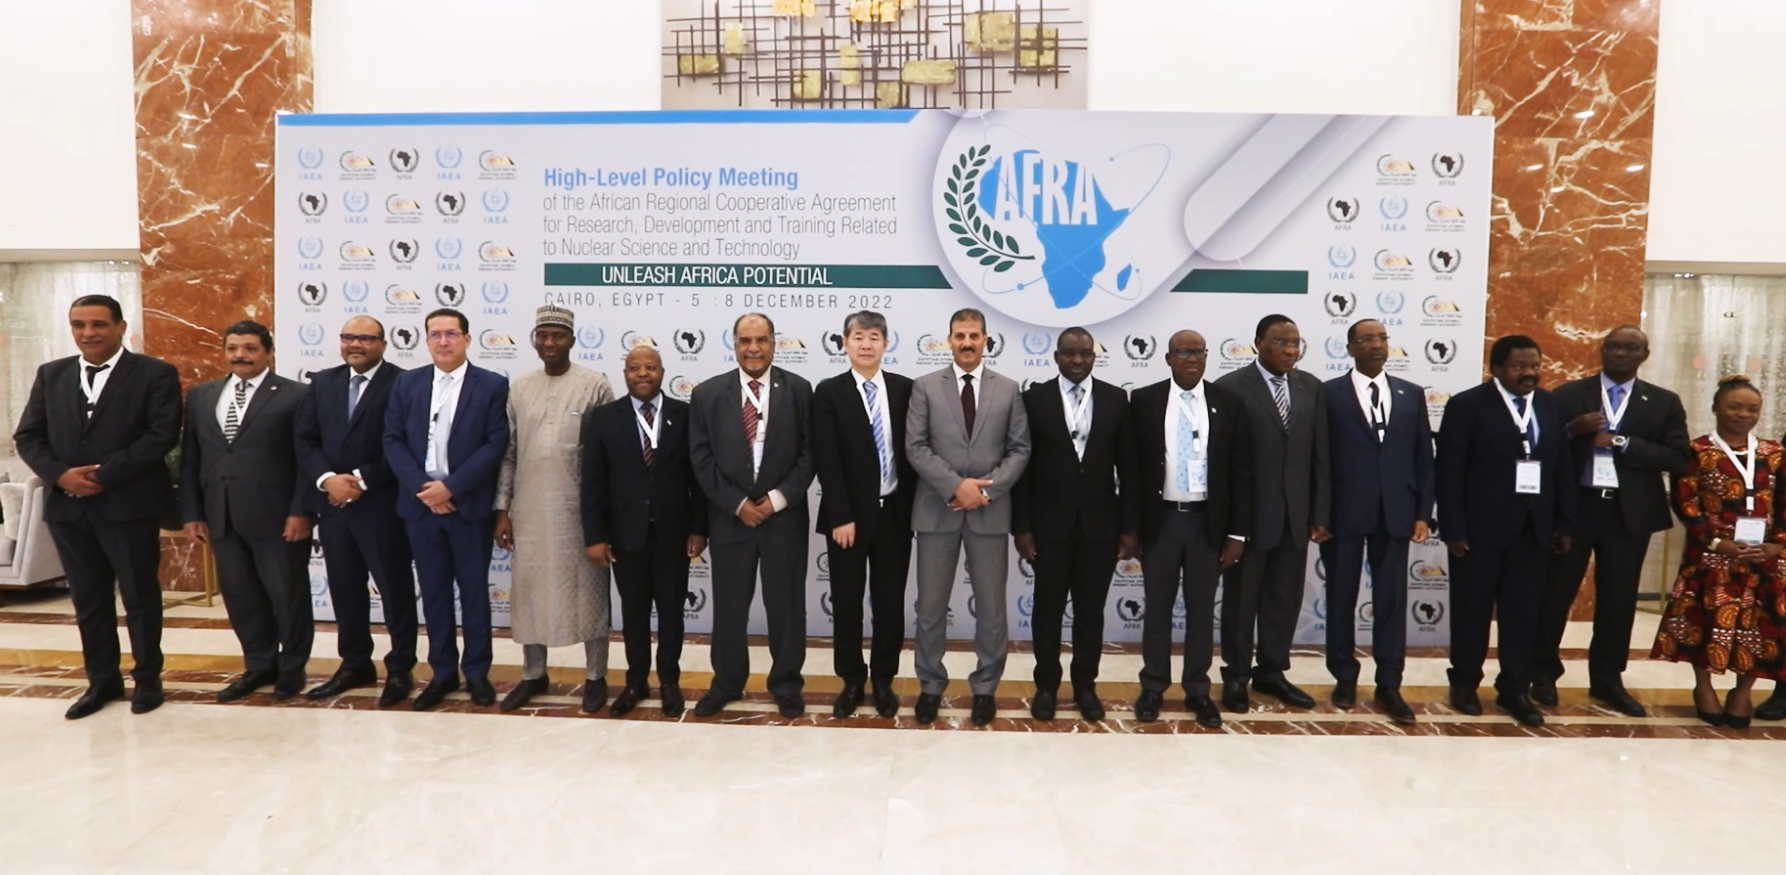 AFRA High Level Policy Meeting, Cairo, Egypt, from 05 to 08 December 2022.